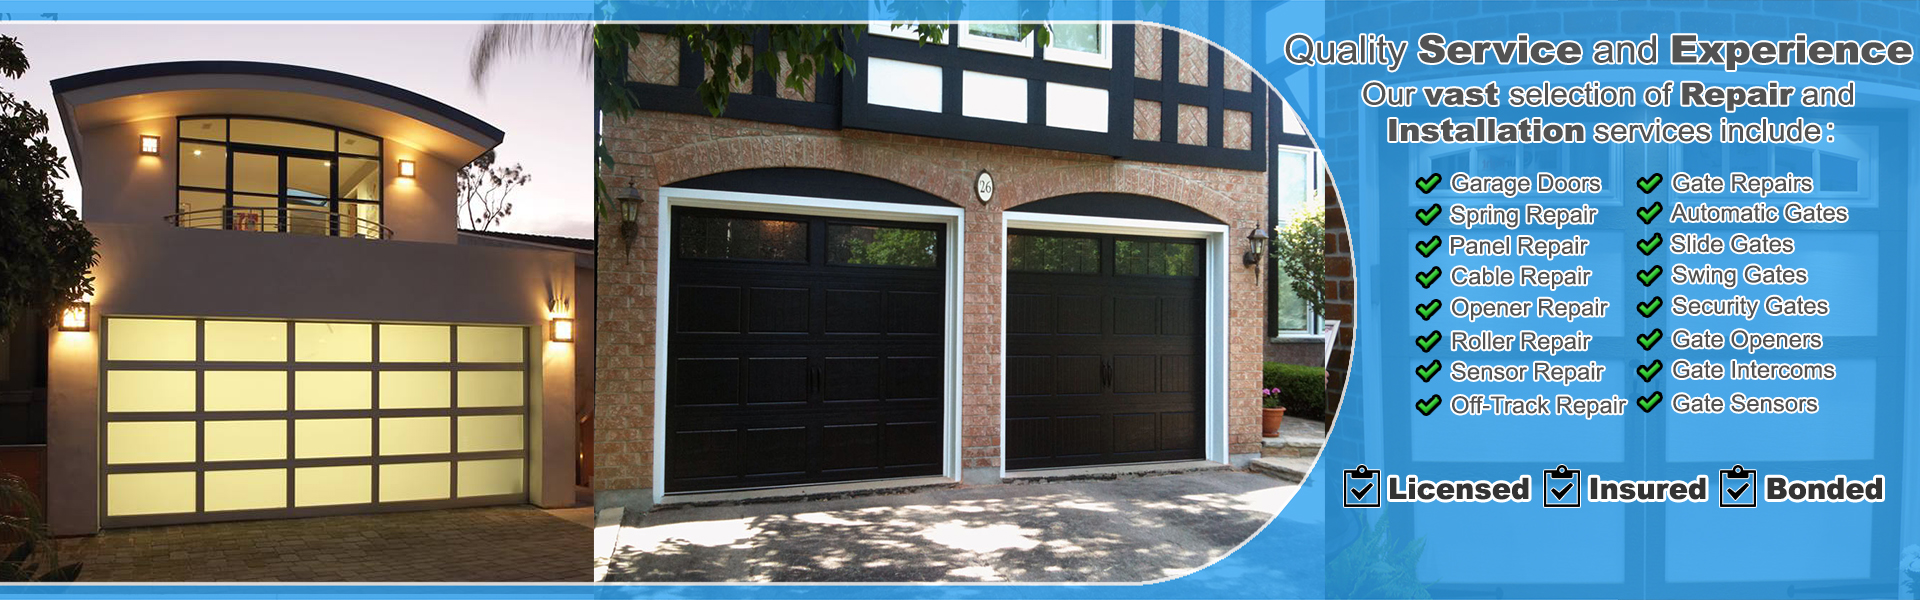 Ace Garage Doors Repair Forest Grove OR Services